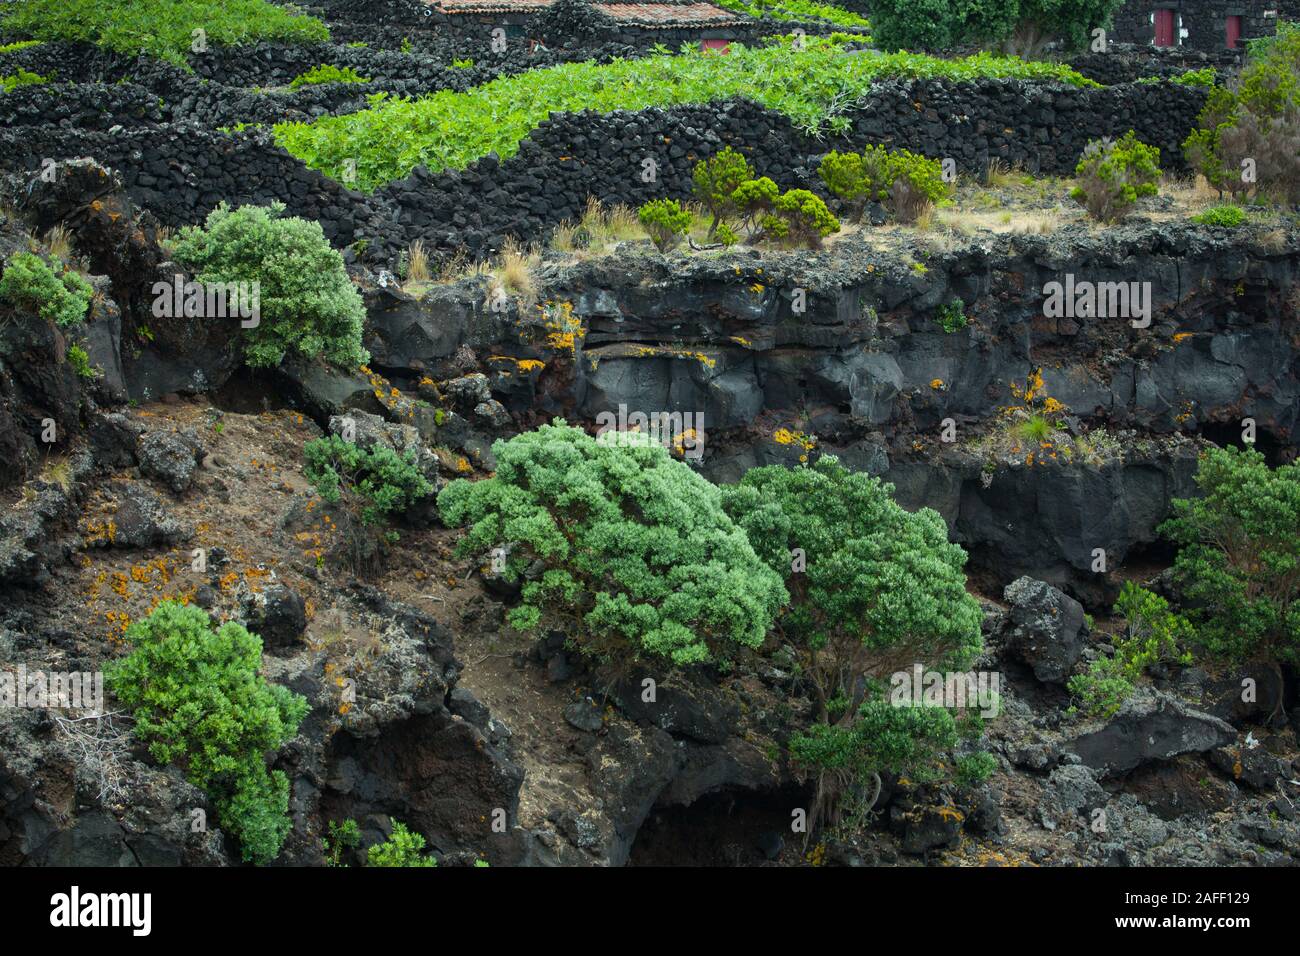 Vineyards made from black volcanic rock at Pico islands and green vegetation. Stock Photo